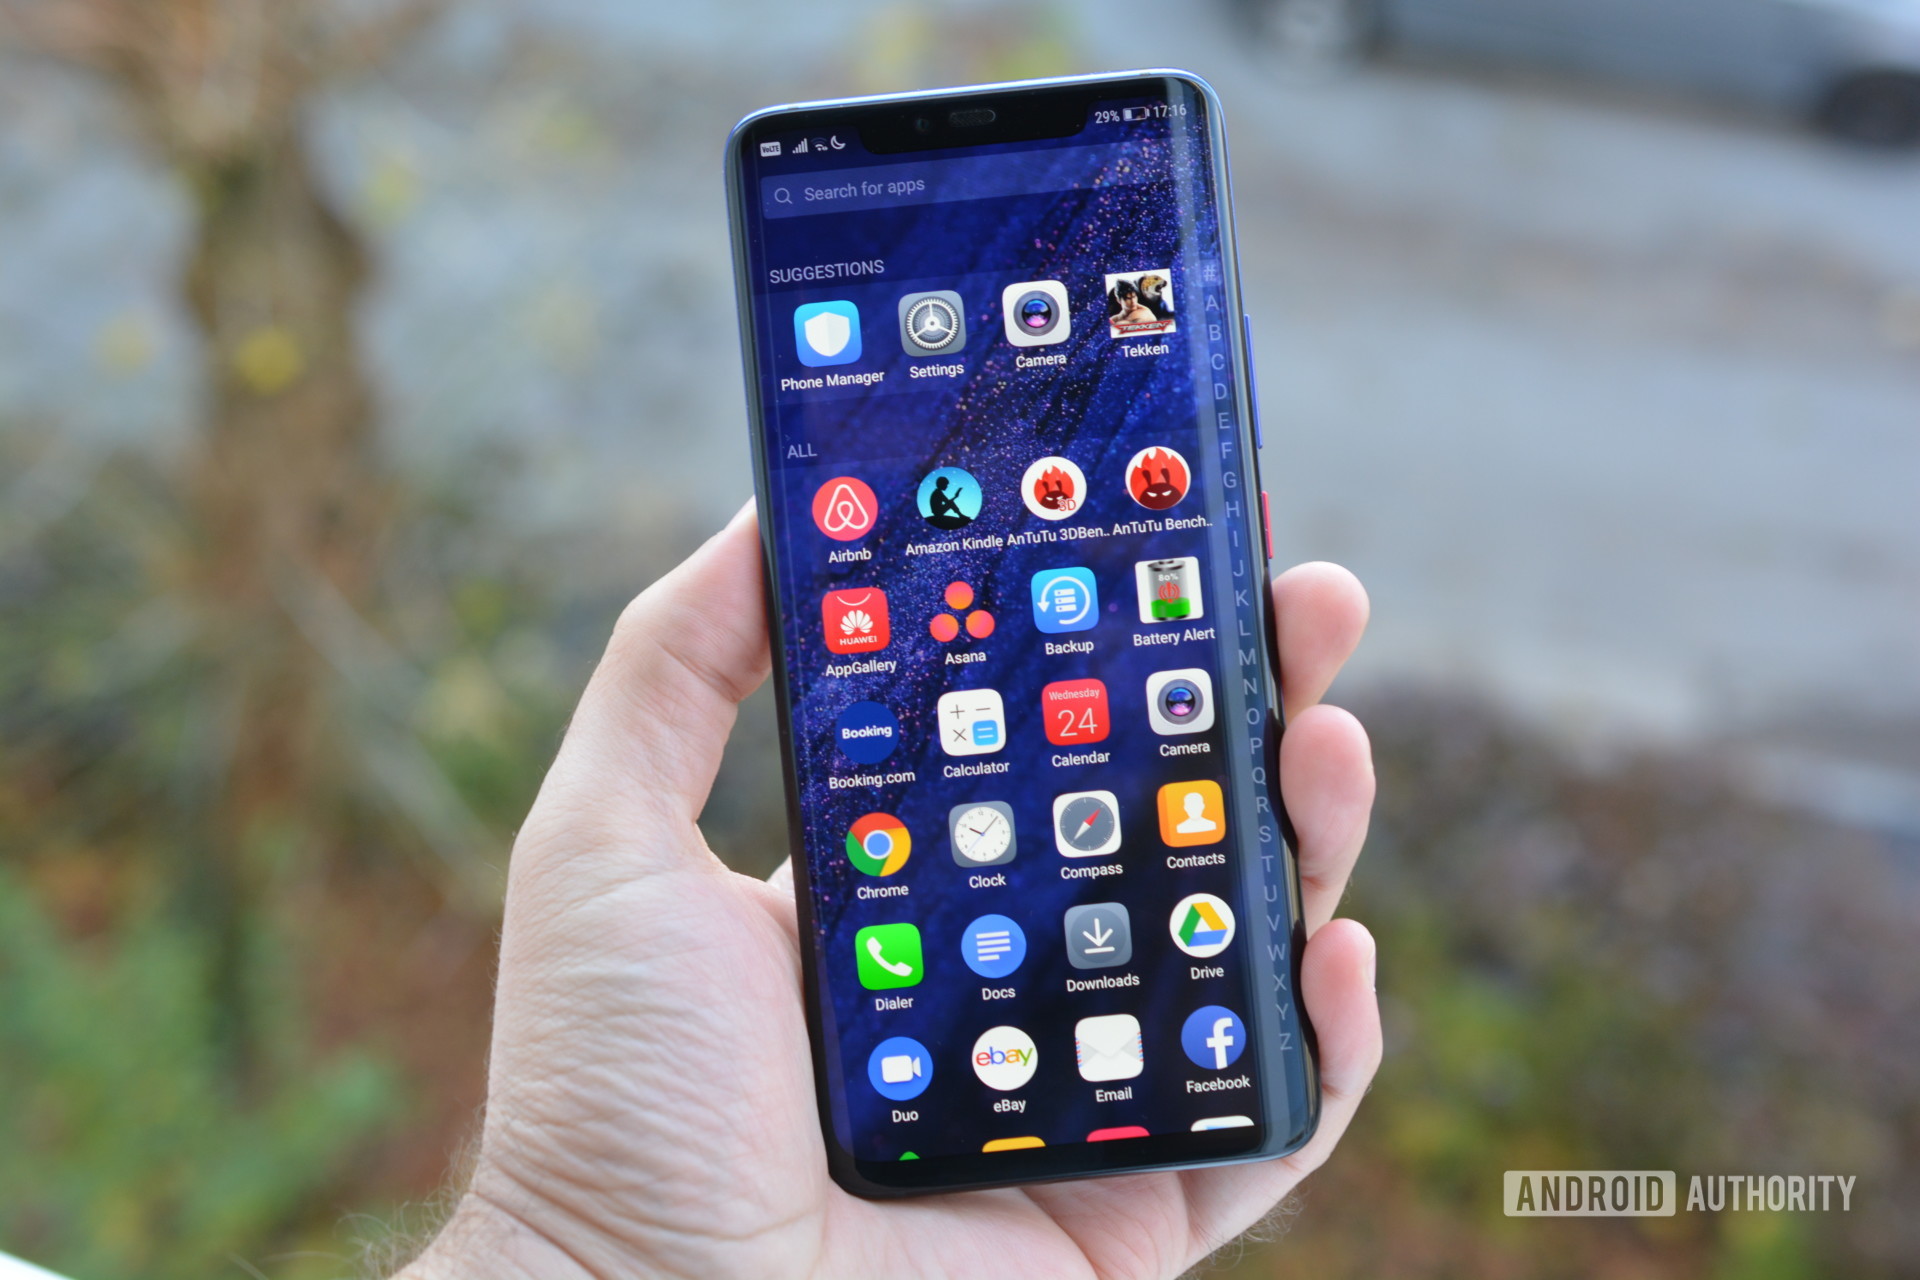 salade Decoratie Blijven HUAWEI Mate 20 Pro update hub (Update: Stable EMUI 10 now available!) -  Android Authority